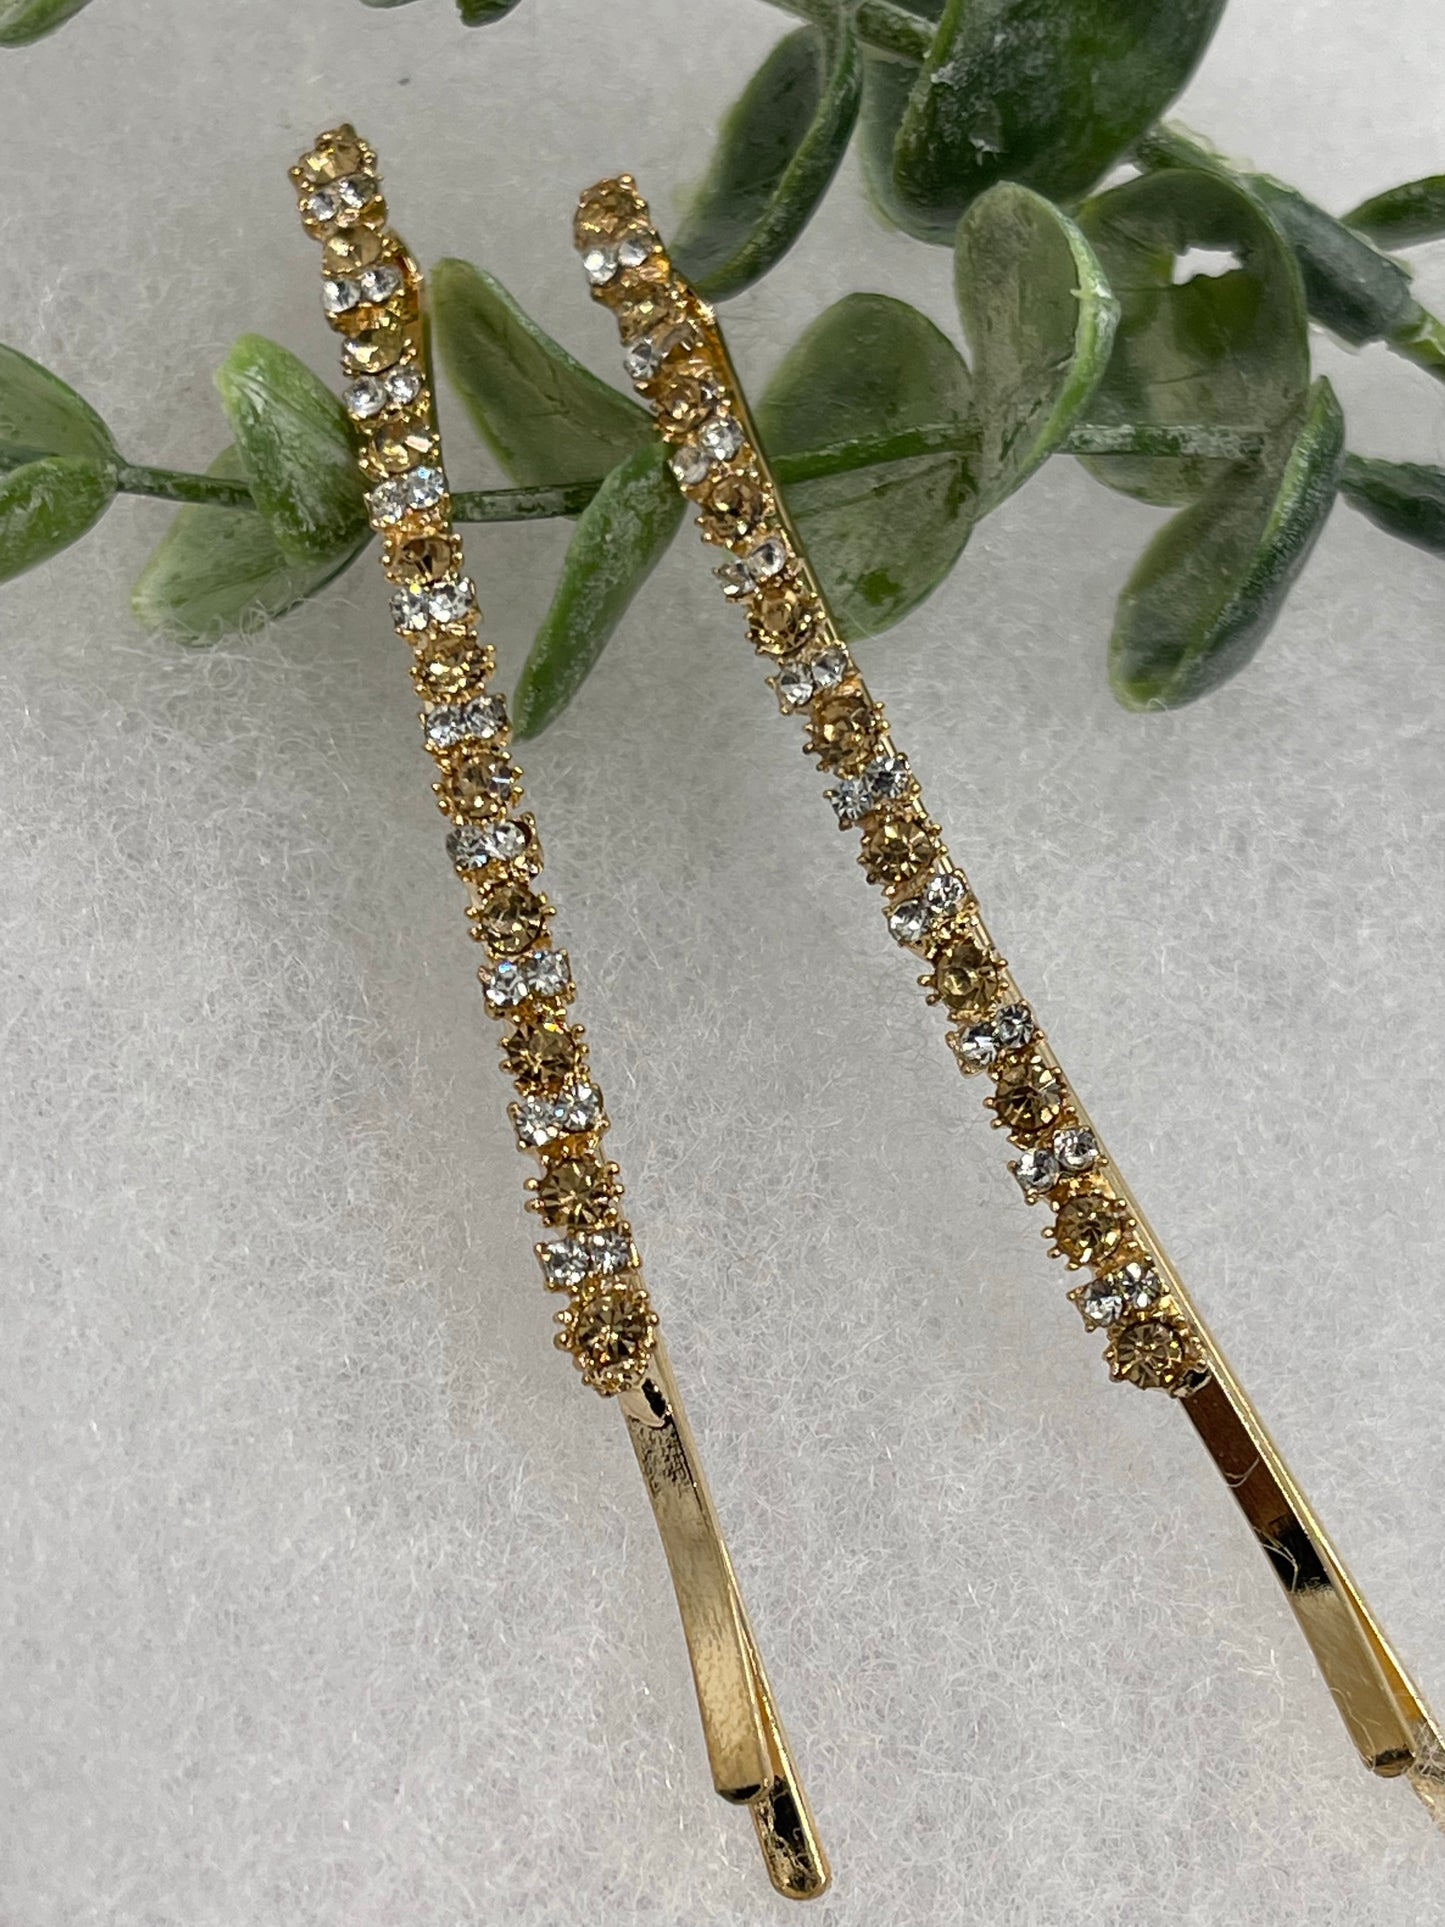 Gold crystal rhinestone approximately 3.5” large gold tone hair pins 2 pc set wedding bridal shower engagement formal princess accessory accessories